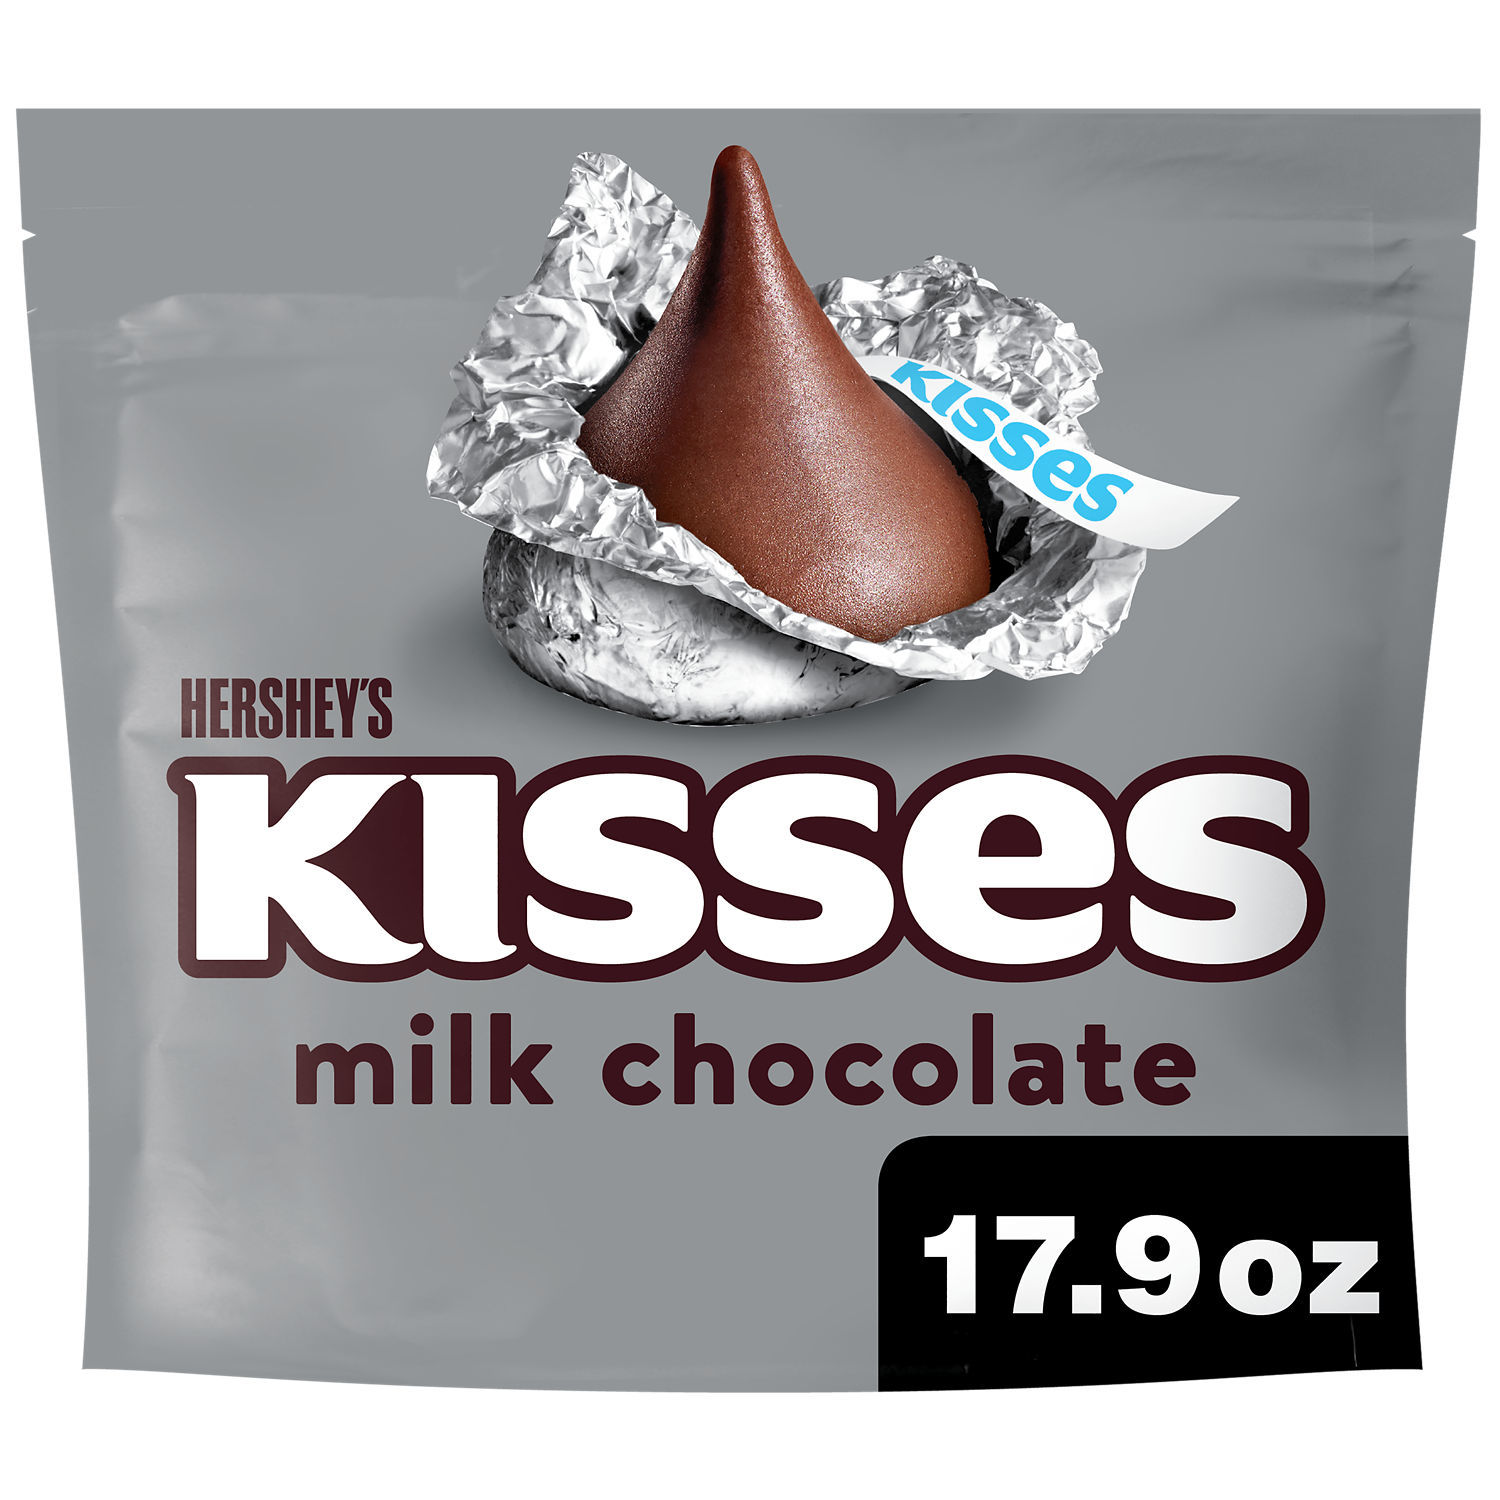 Hershey's Kisses Milk Chocolate Candy, Family Pack 17.9 oz - image 1 of 9